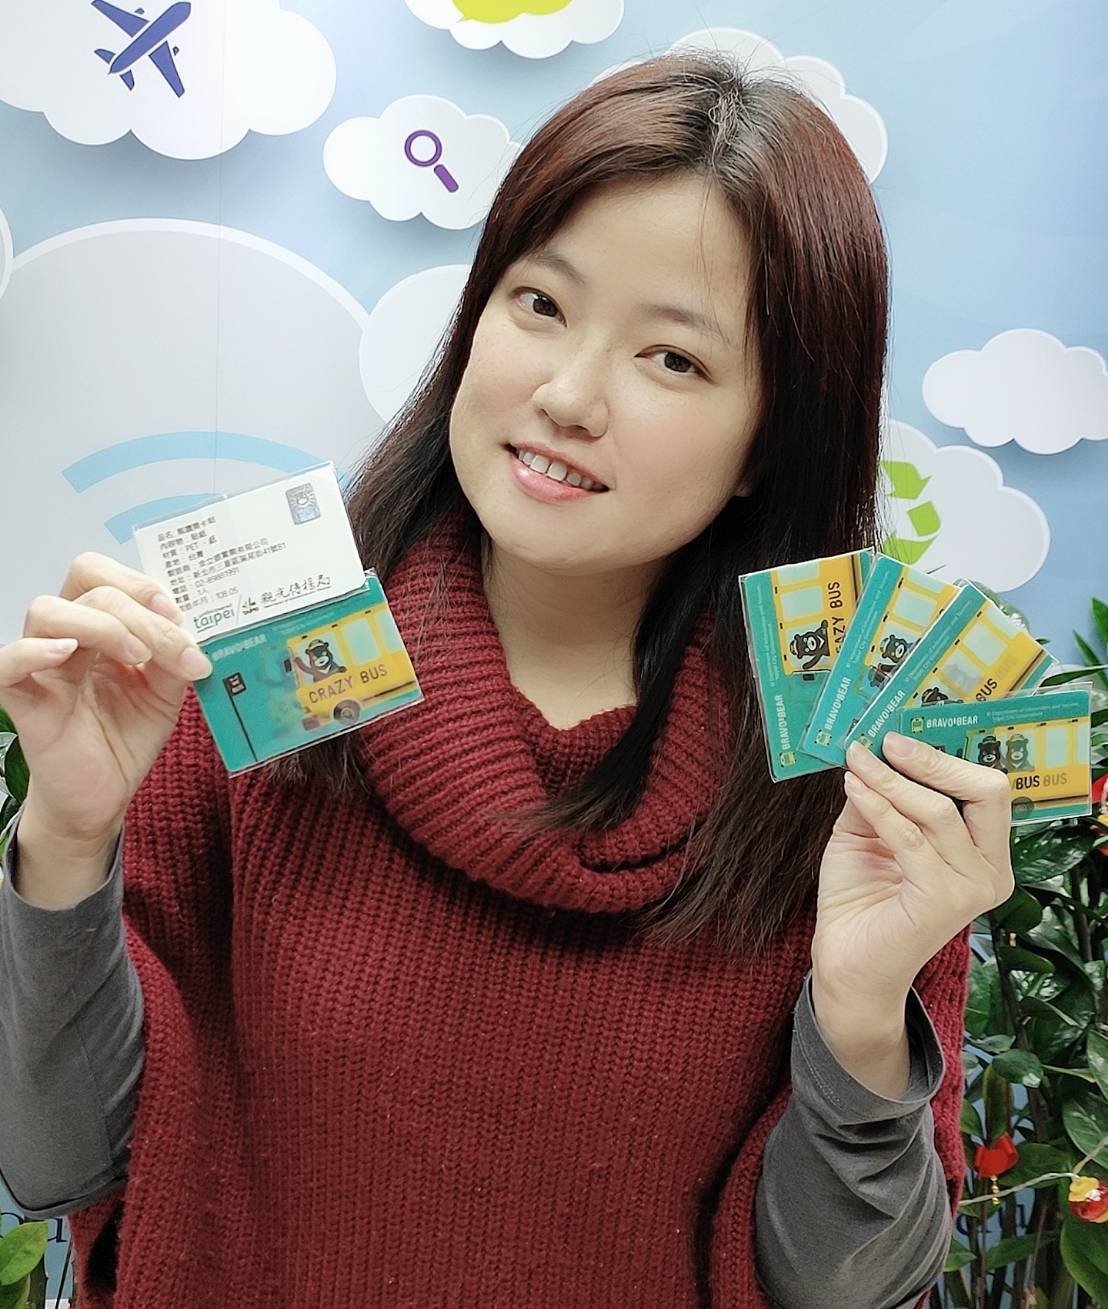 Bravo EasyCard Sticker. Source: Department of Information and Tourism, Taipei City Government